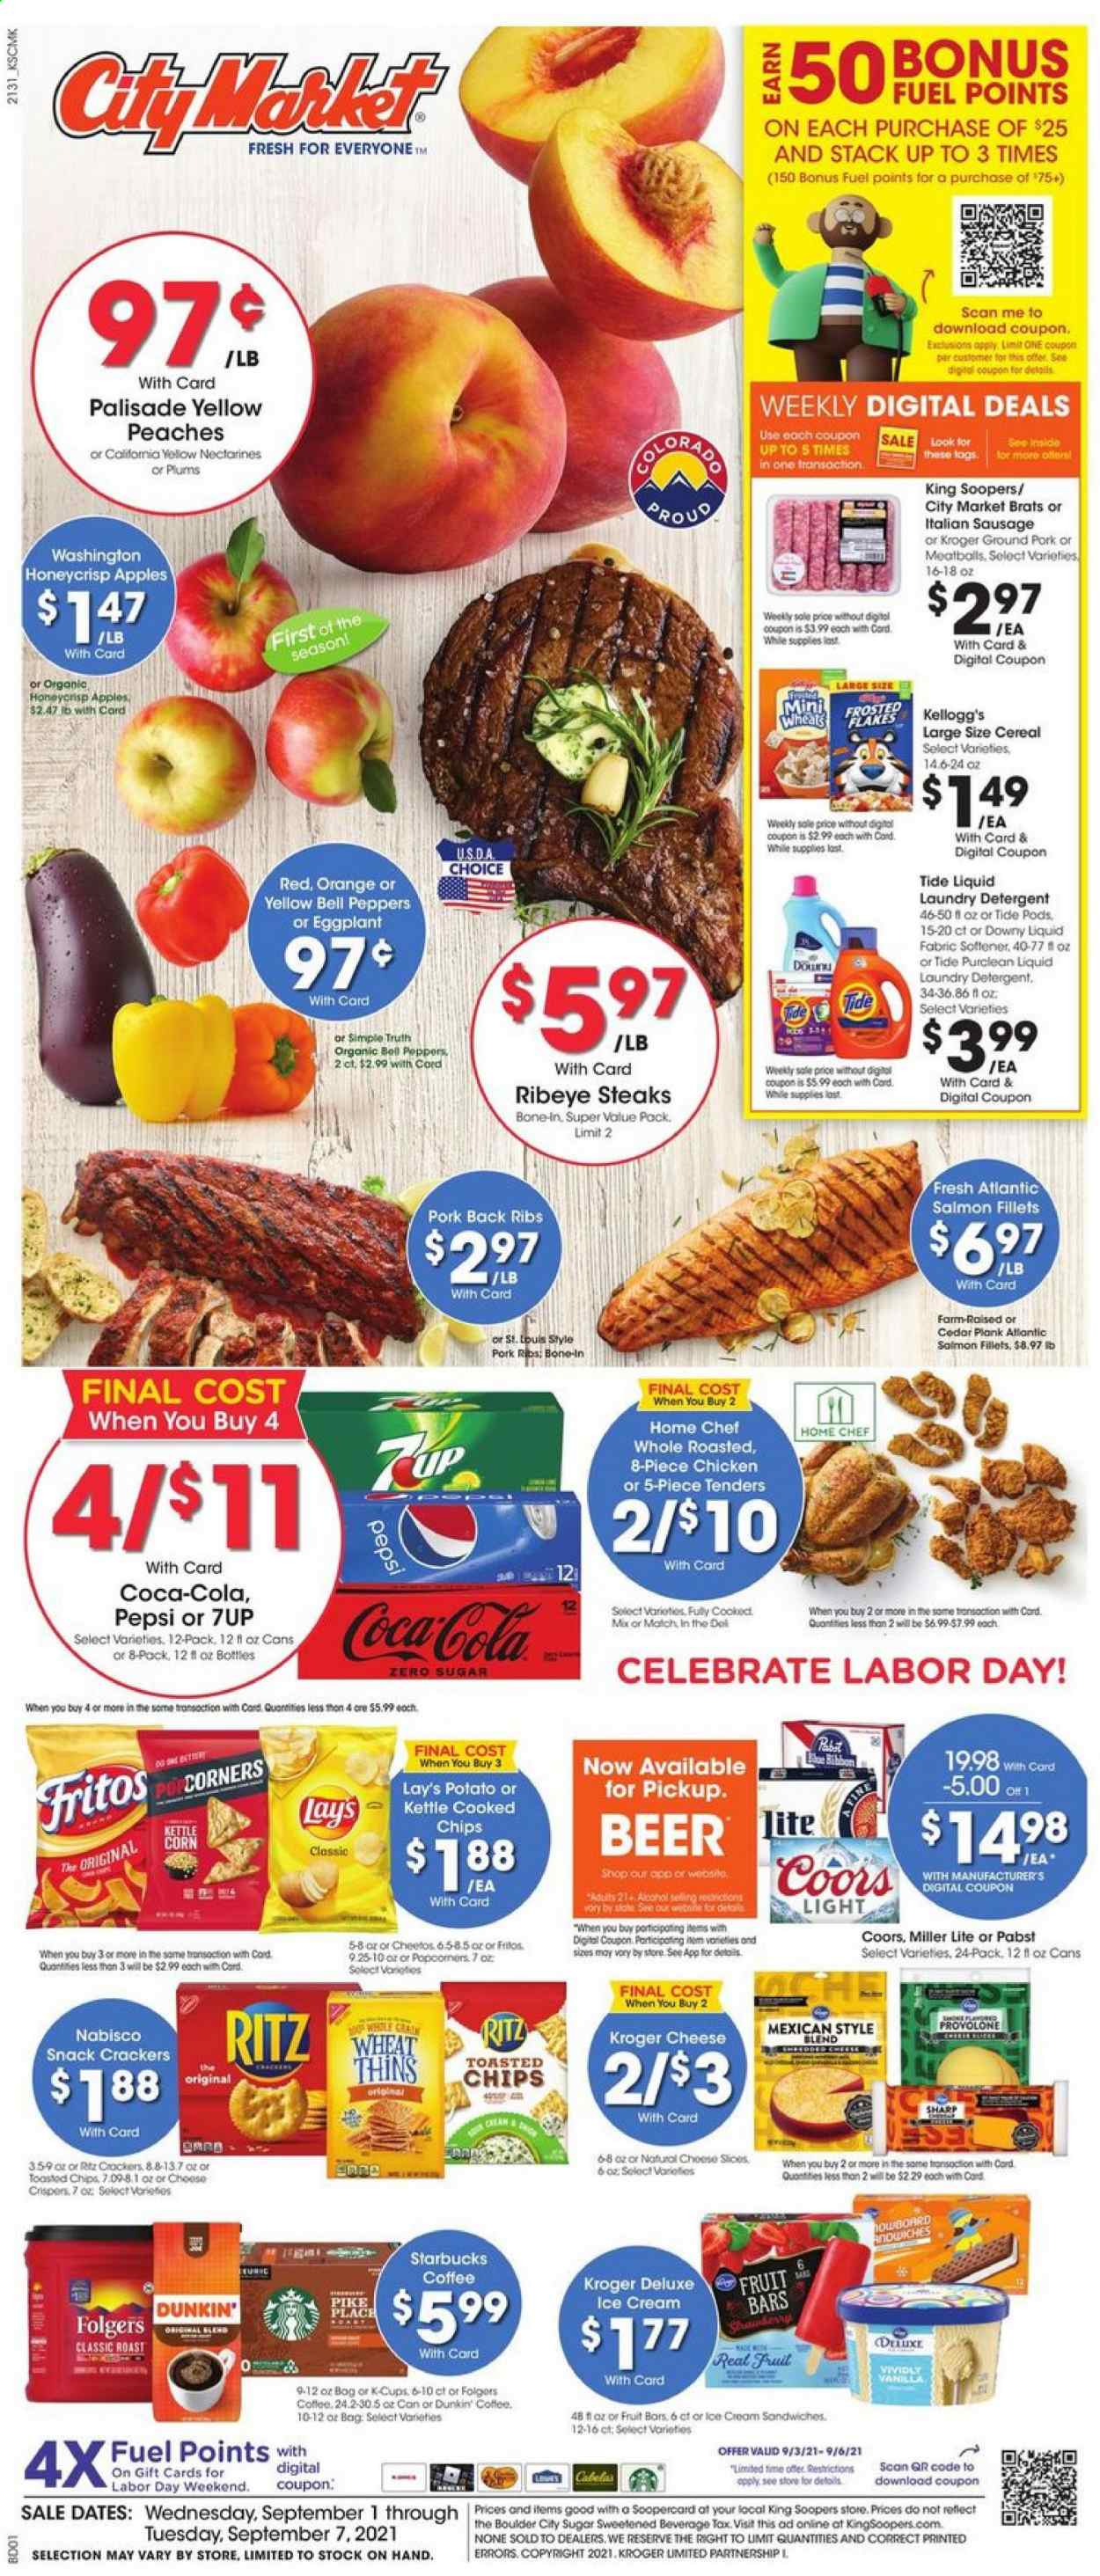 thumbnail - City Market Flyer - 09/01/2021 - 09/07/2021 - Sales products - plums, bell peppers, peppers, eggplant, apples, oranges, salmon, salmon fillet, meatballs, sandwich, sausage, italian sausage, ice cream, snack, crackers, Kellogg's, RITZ, Fritos, kettle corn, Cheetos, chips, Lay’s, Thins, cereals, Frosted Flakes, Coca-Cola, Pepsi, 7UP, coffee, Starbucks, Folgers, coffee capsules, L'Or, K-Cups, beer, beef meat, steak, ribeye steak, ground pork, pork meat, pork ribs, pork back ribs, detergent, Tide, fabric softener, laundry detergent, Downy Laundry, Sharp, Miller Lite, nectarines, Coors, peaches. Page 1.